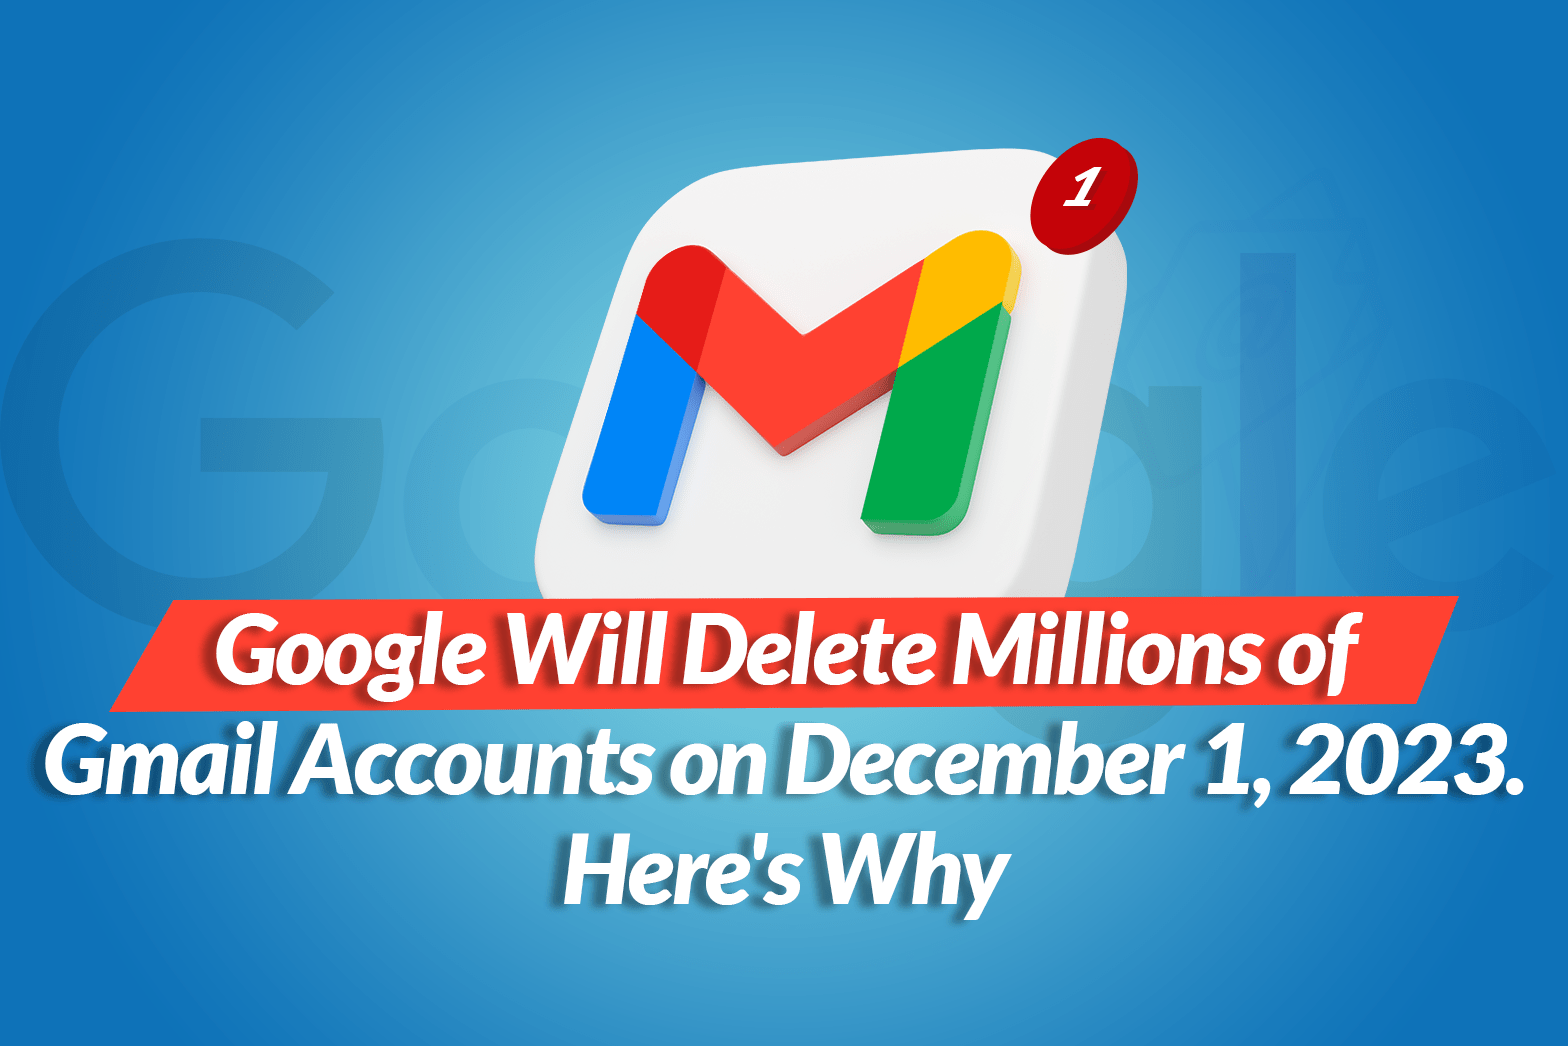 Google will delete millions of Gmail accounts on December 1 2023. Here’s Why